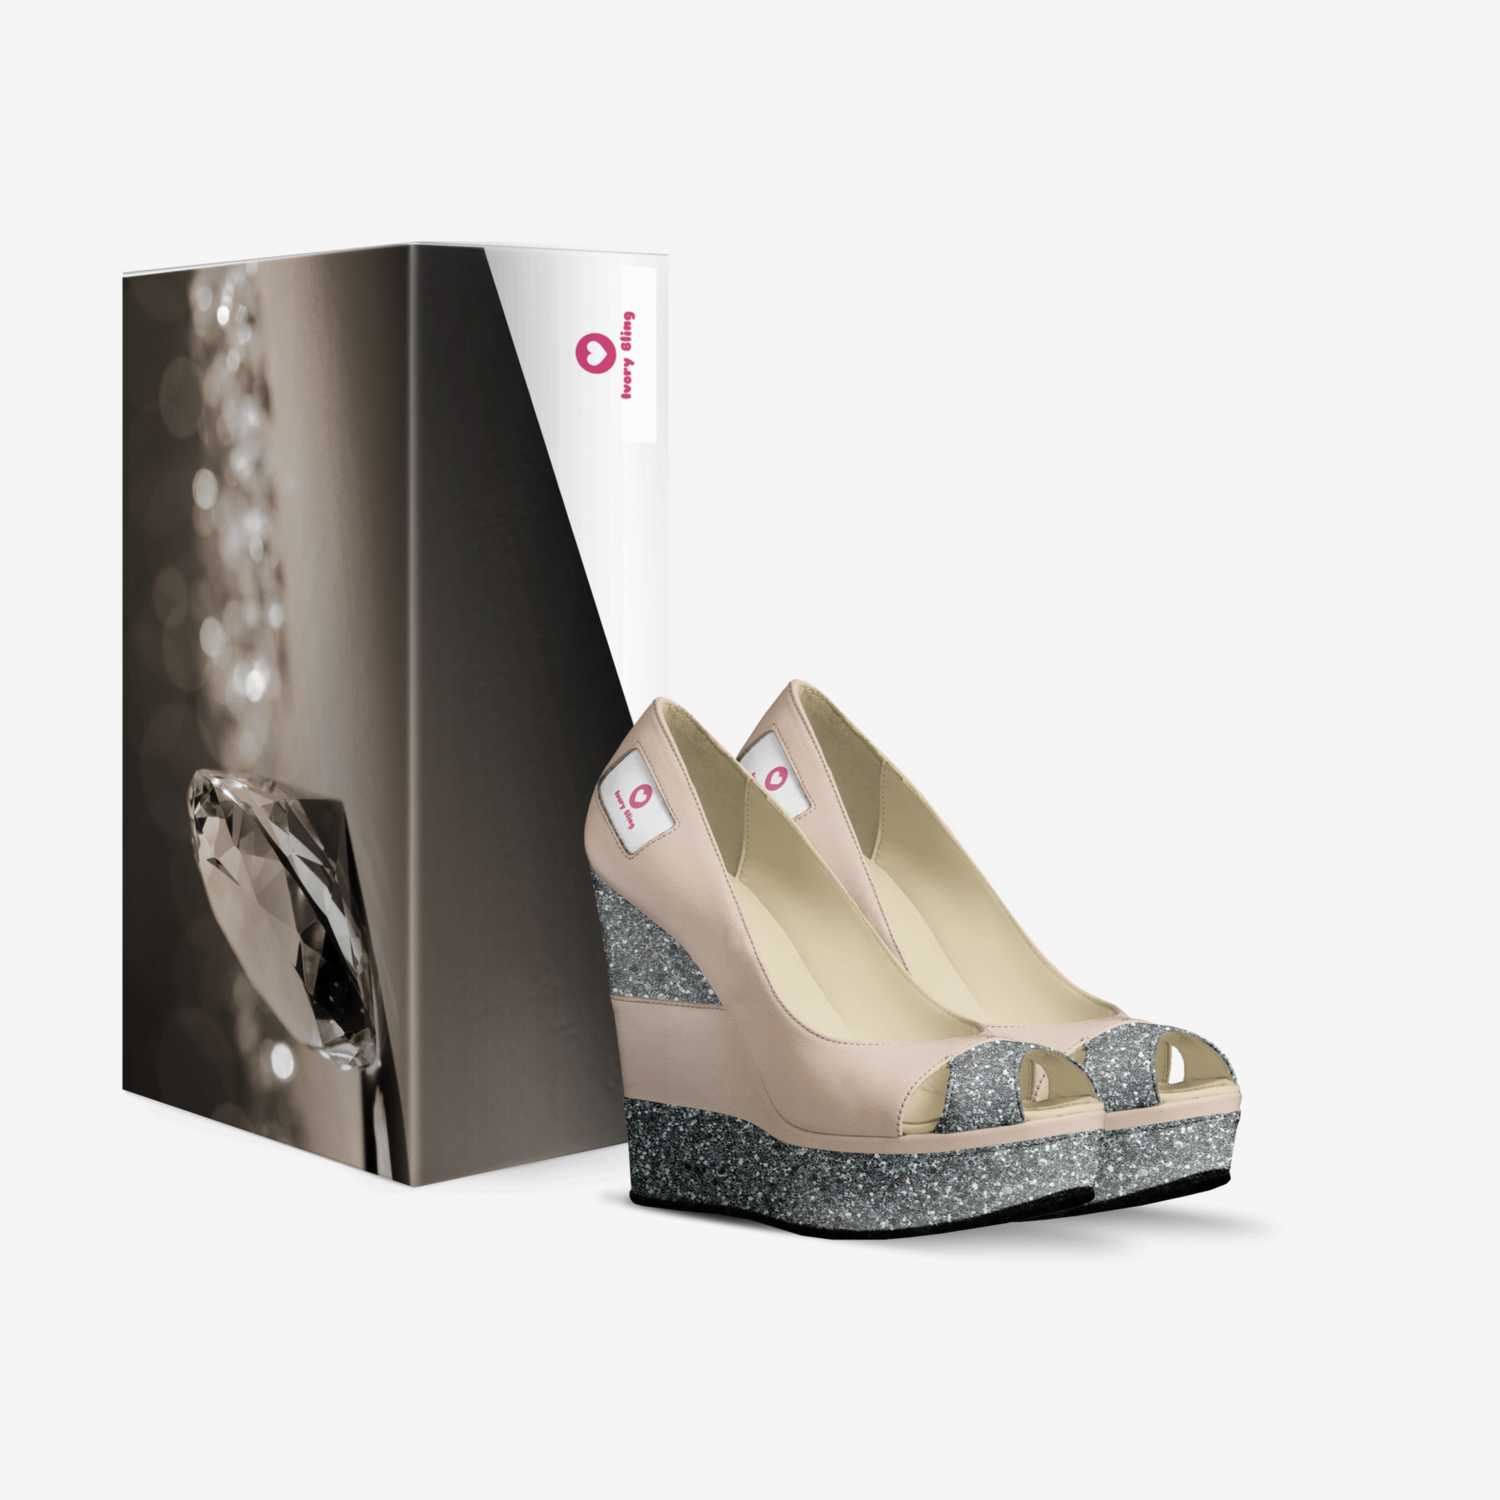 Ivory Bling custom made in Italy shoes by Aomoji Kei | Box view